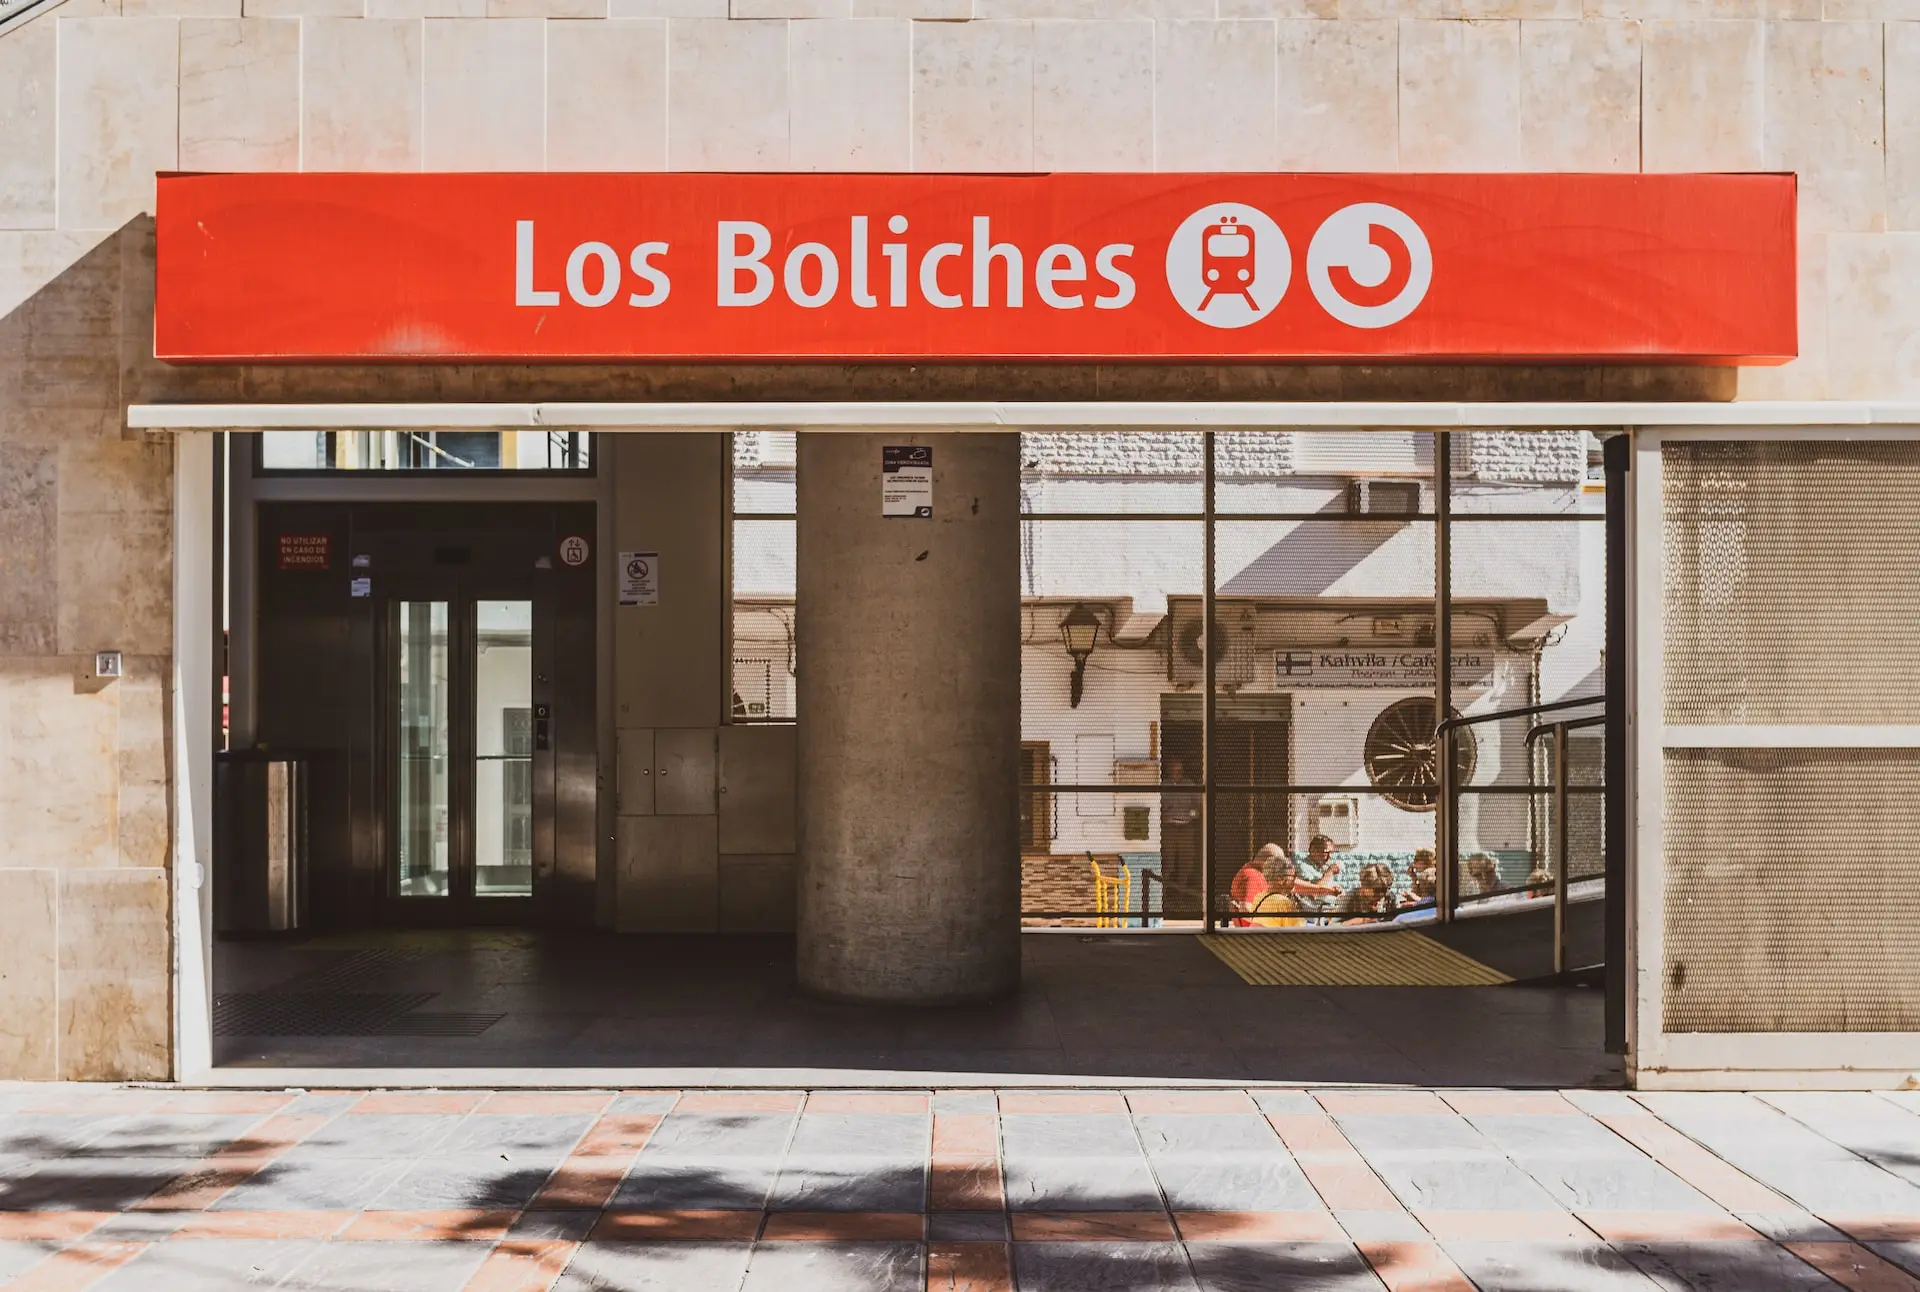 Los Boliches train station, one of the stops of Fuengirola